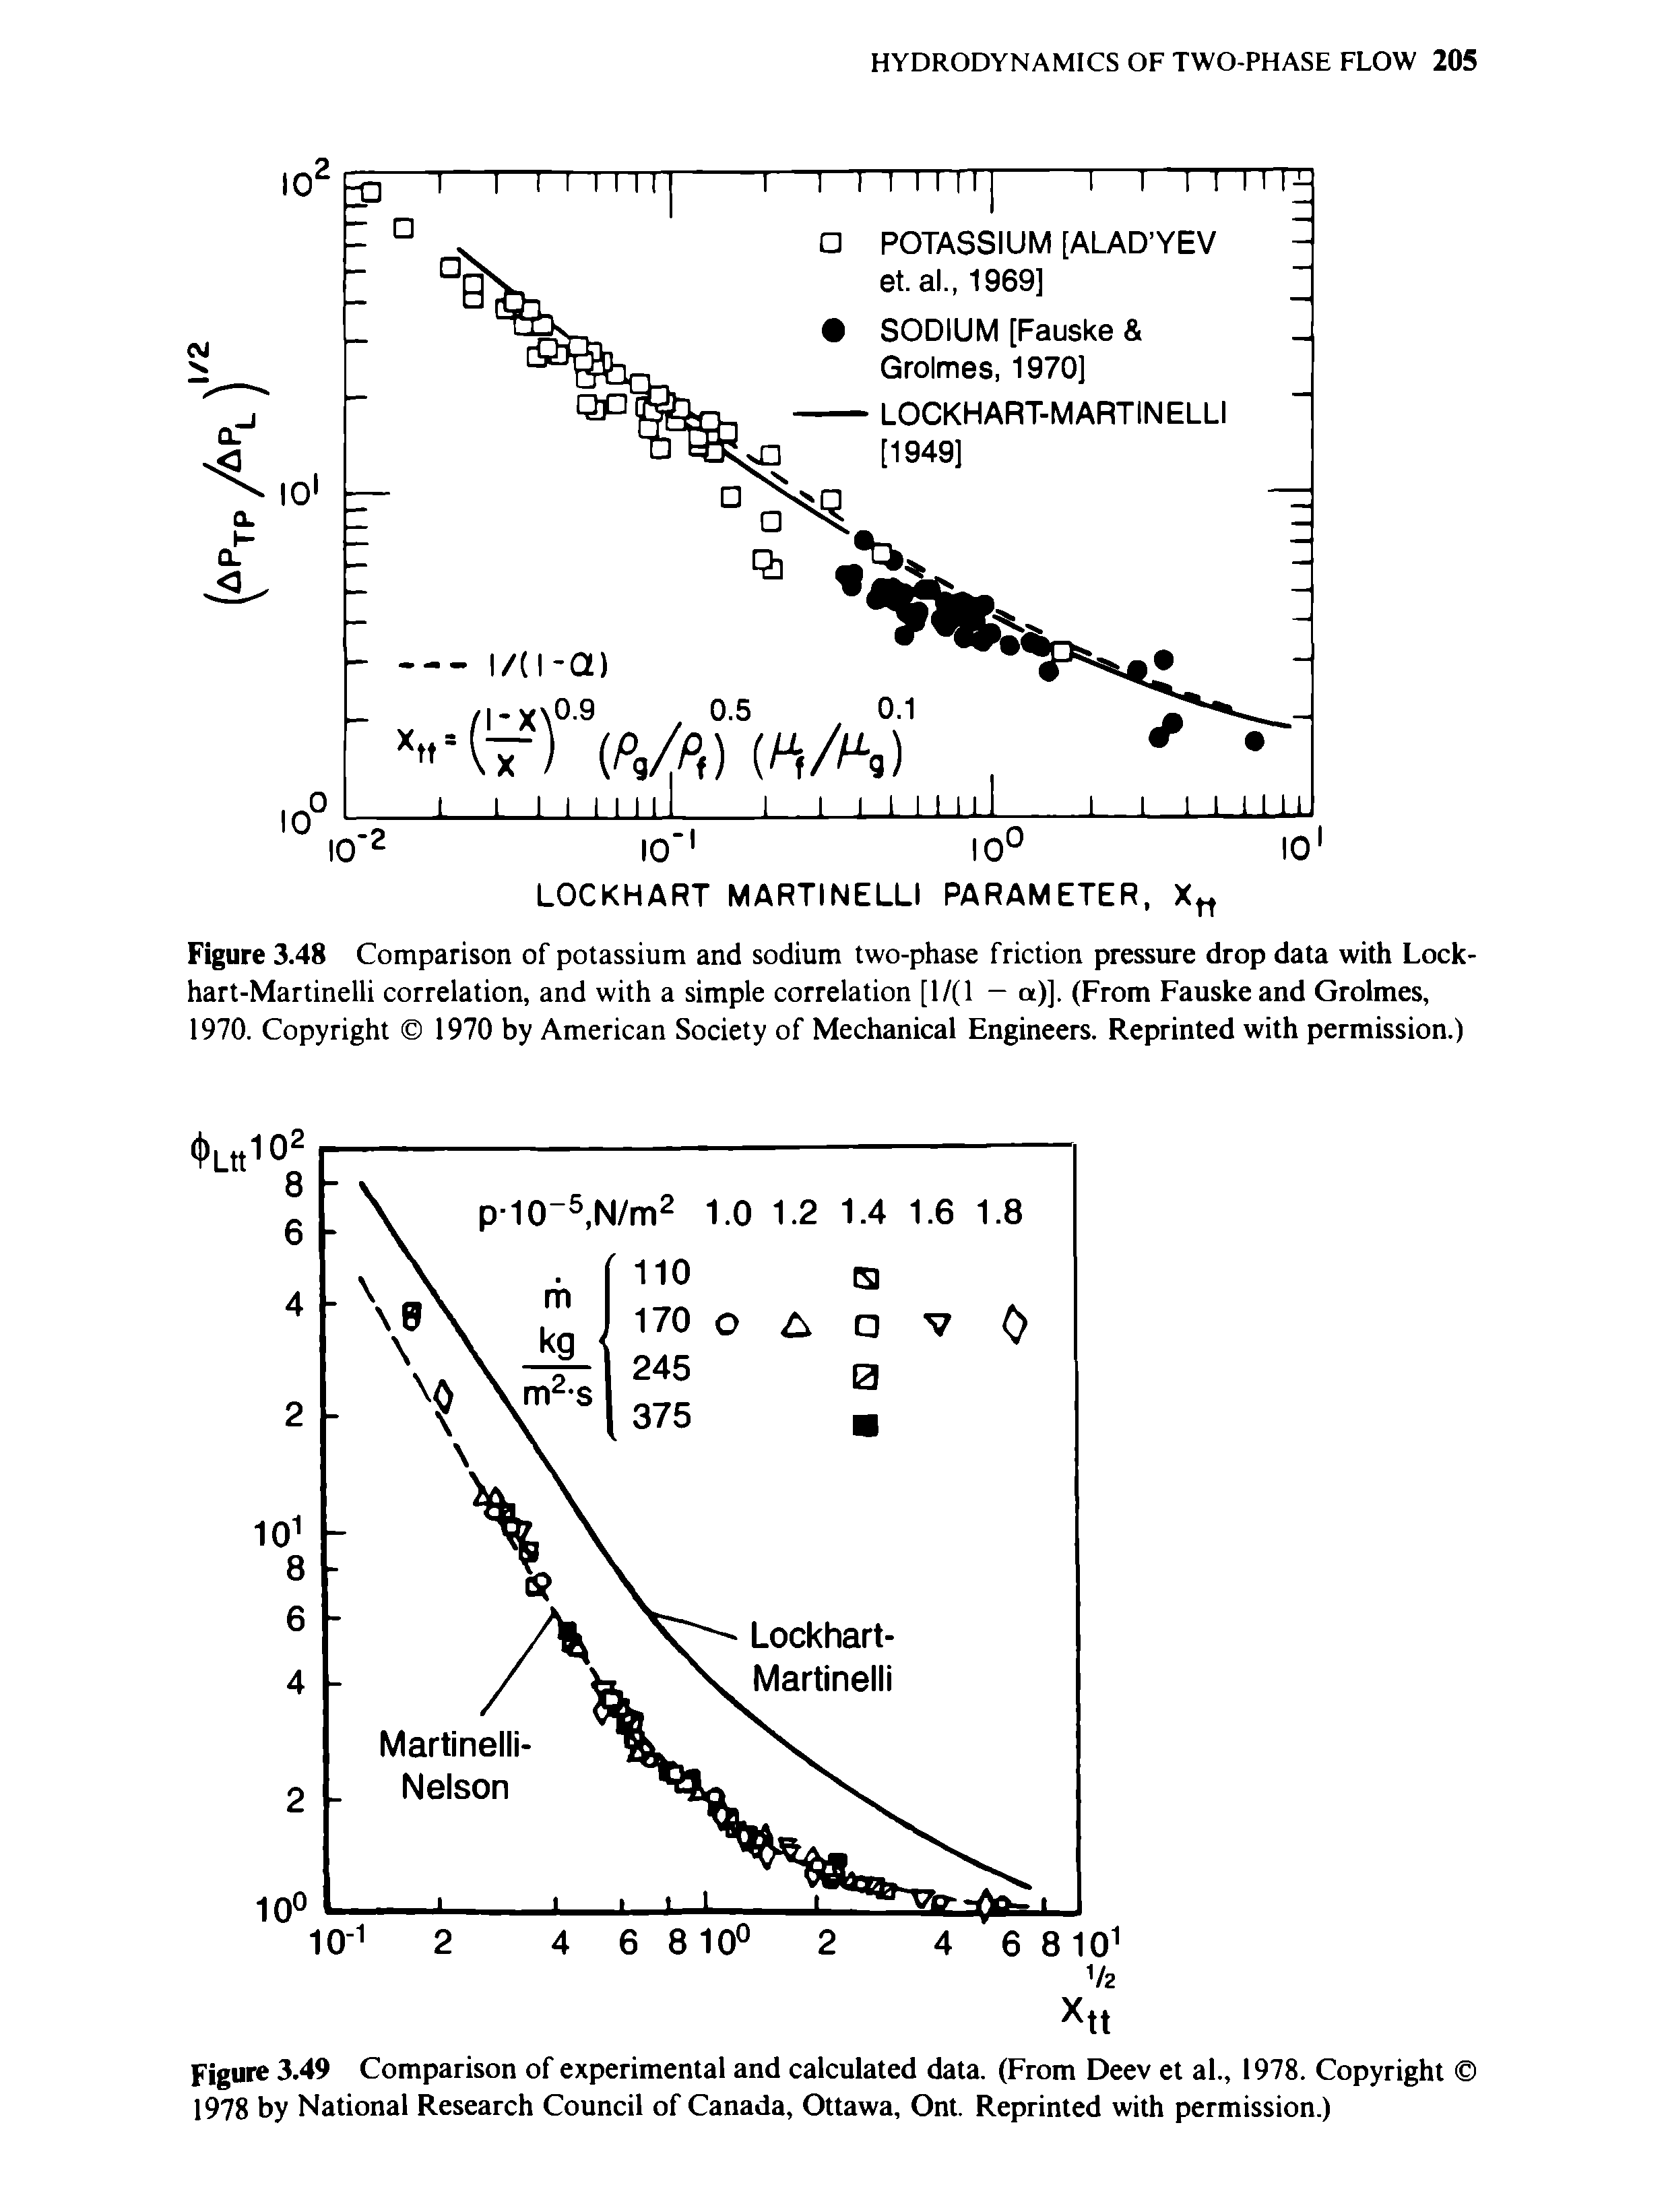 Figure 3.48 Comparison of potassium and sodium two-phase friction pressure drop data with Lock-hart-Martinelli correlation, and with a simple correlation [1/(1 - a)]. (From Fauskeand Grolmes, 1970. Copyright 1970 by American Society of Mechanical Engineers. Reprinted with permission.)...